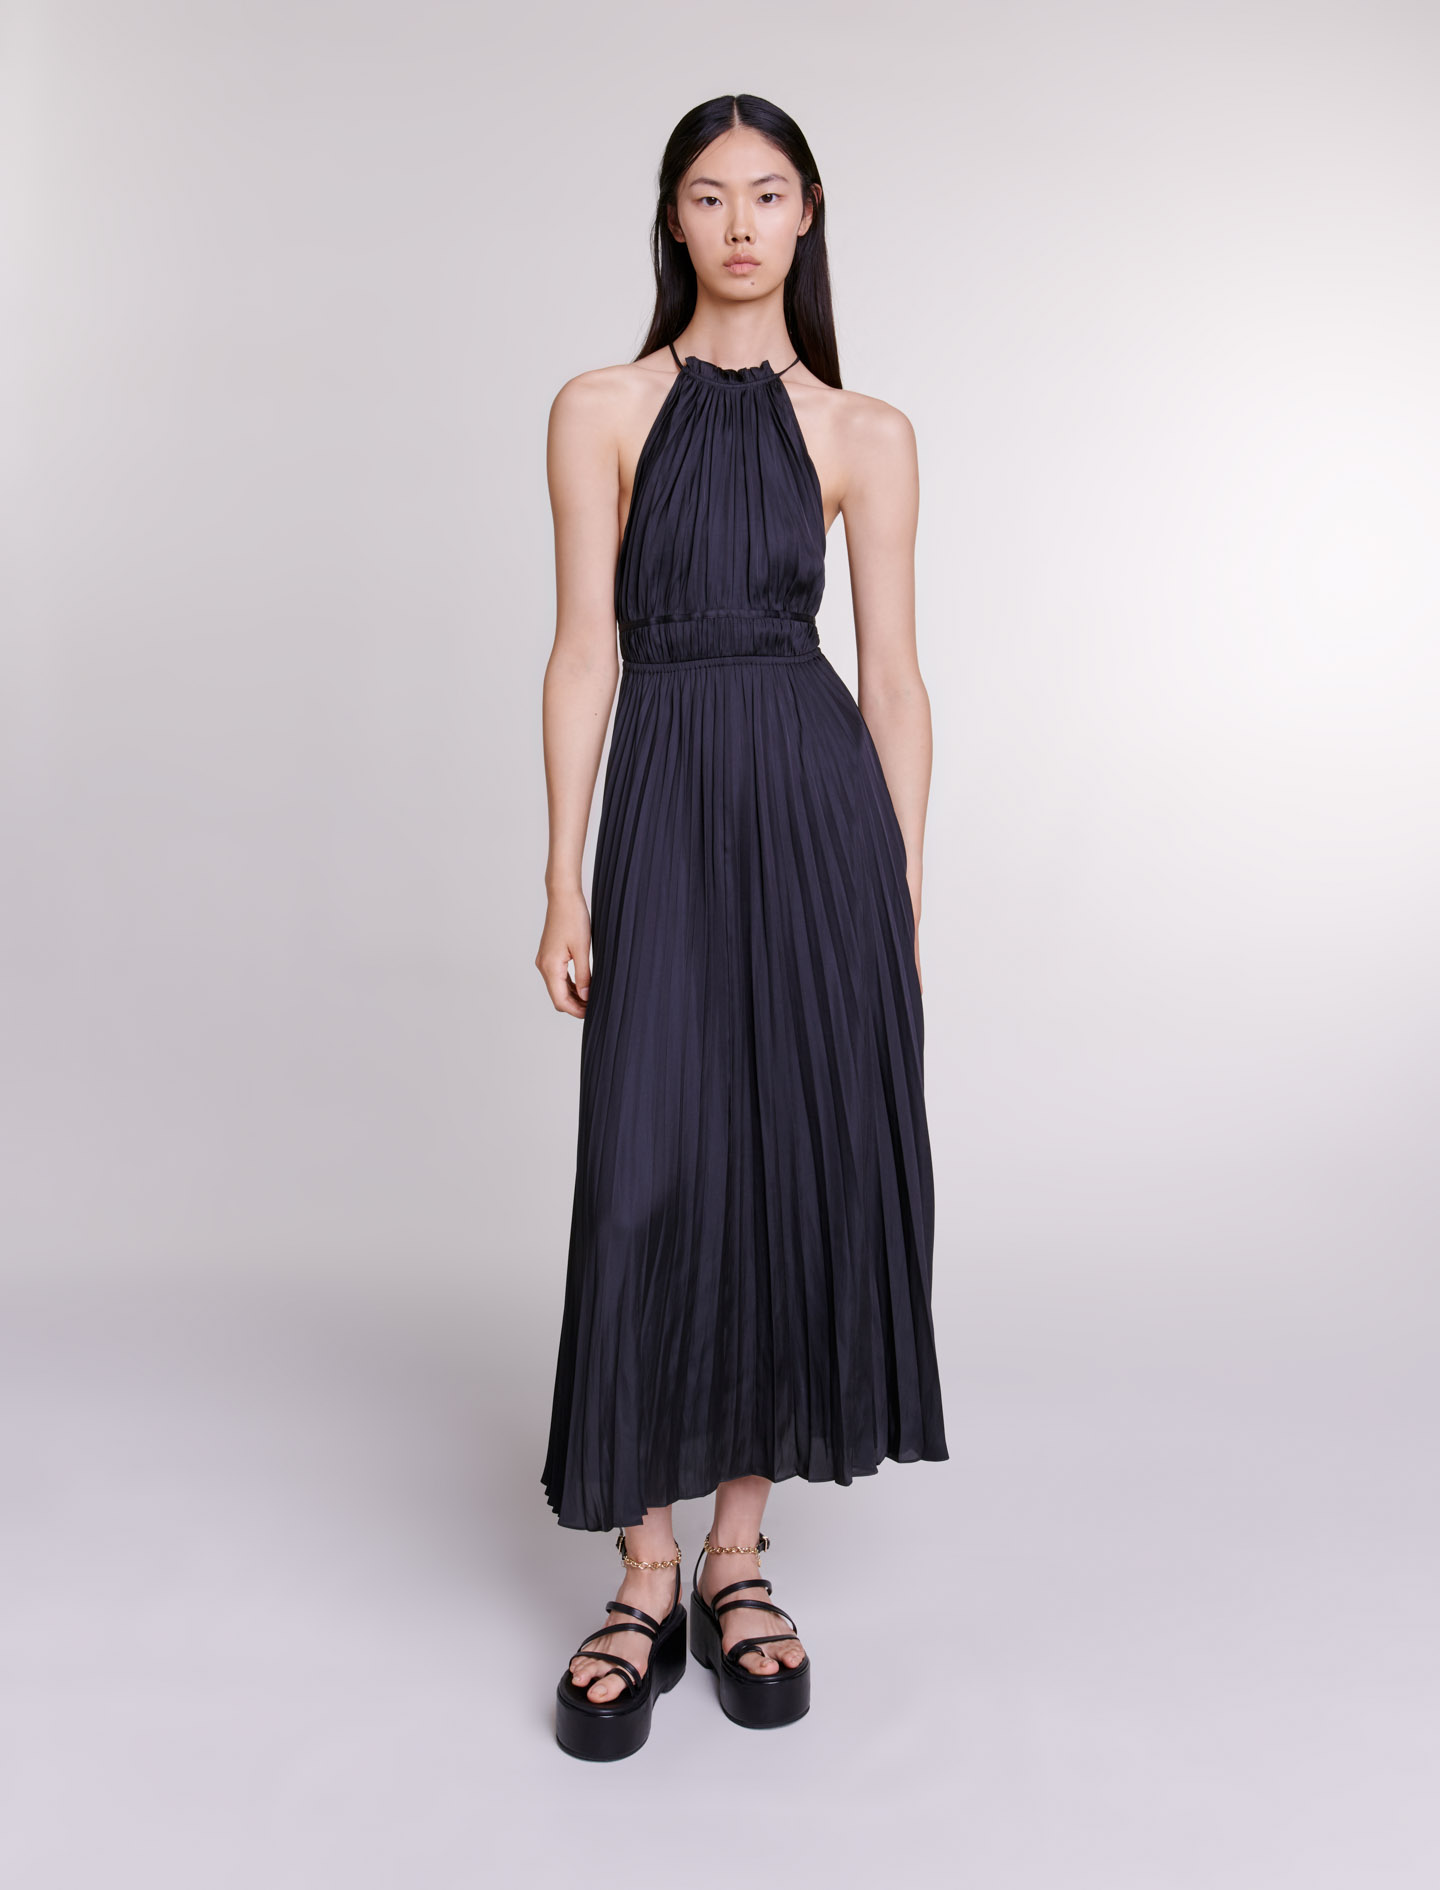 Maje Woman's polyester Pleated satin maxi dress for Spring/Summer, in color Black / Black